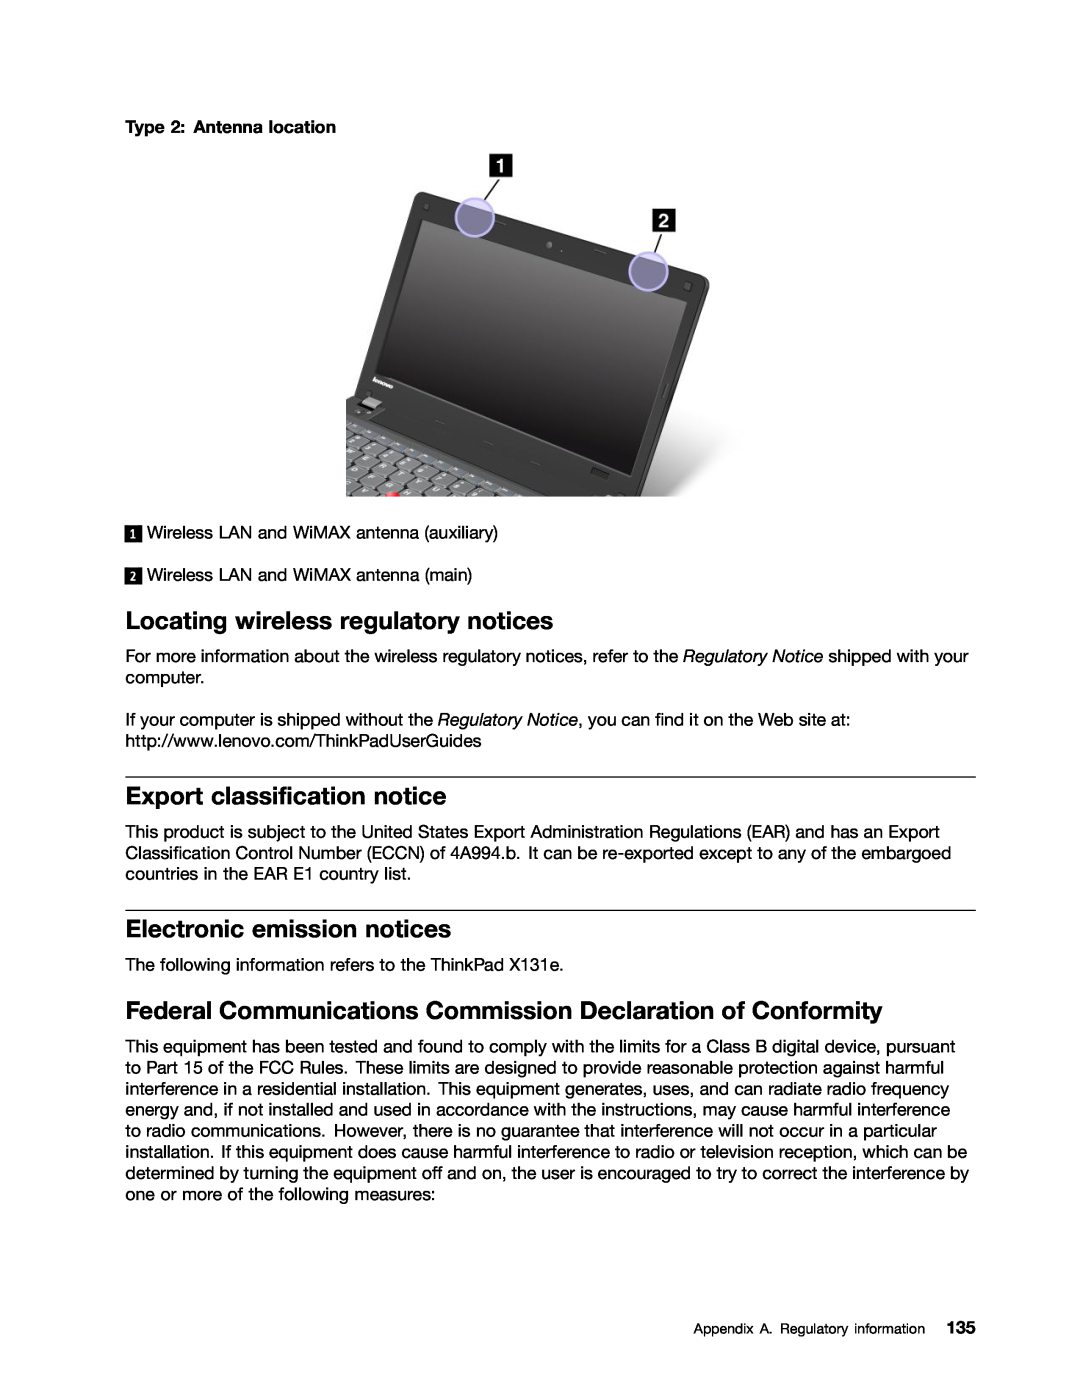 Lenovo X131E manual Locating wireless regulatory notices, Export classification notice, Electronic emission notices 